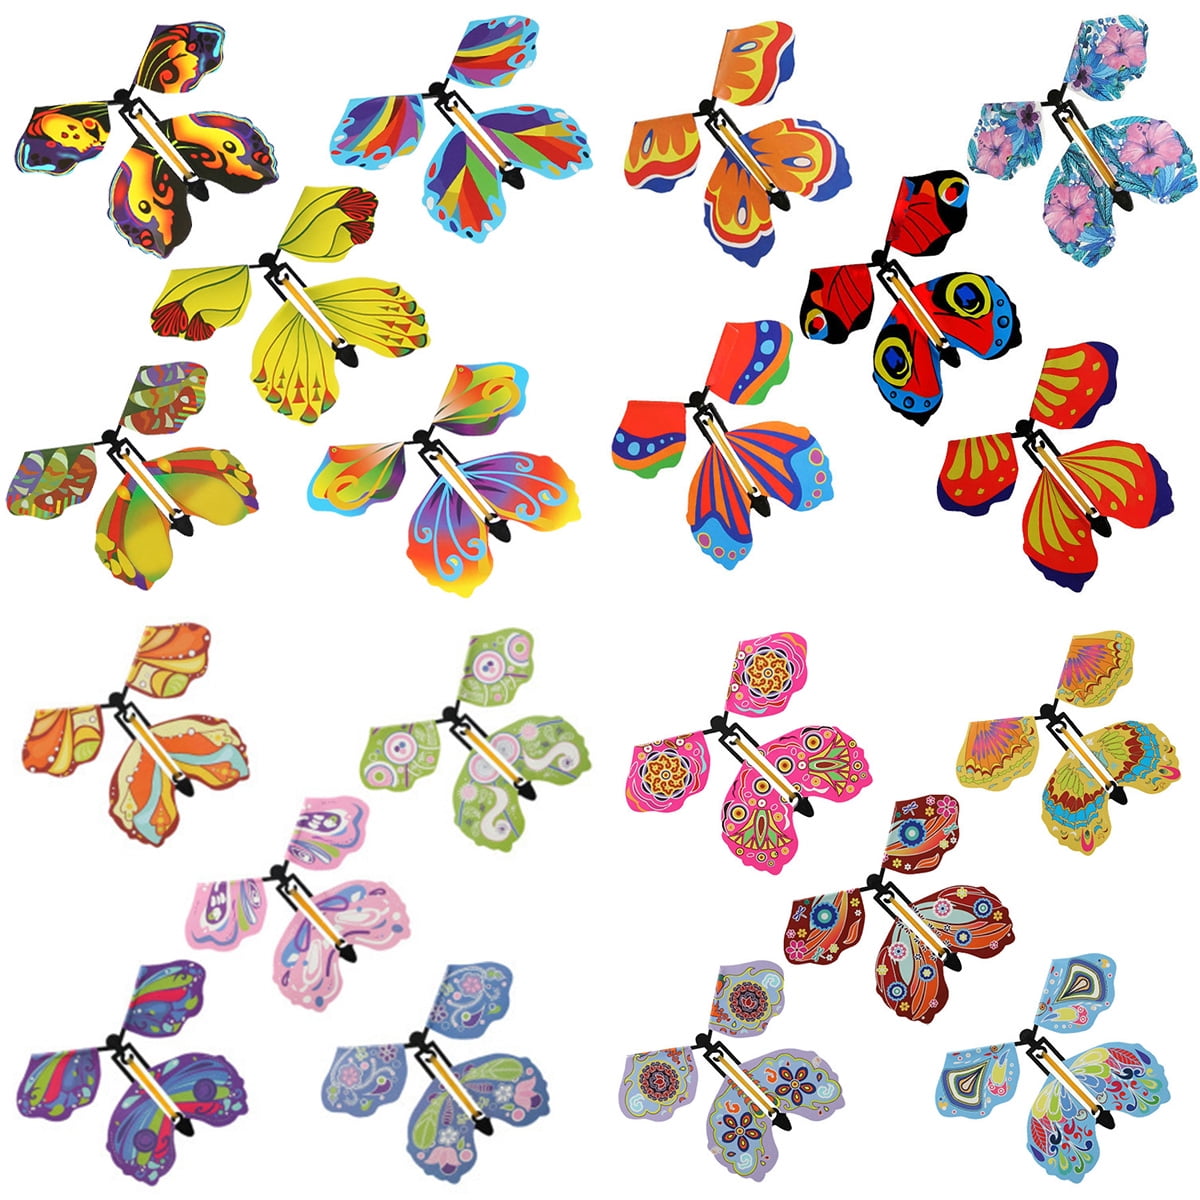 20pcs 58cm Butterfly Series Flower Wrapping Paper Butterfly Dance